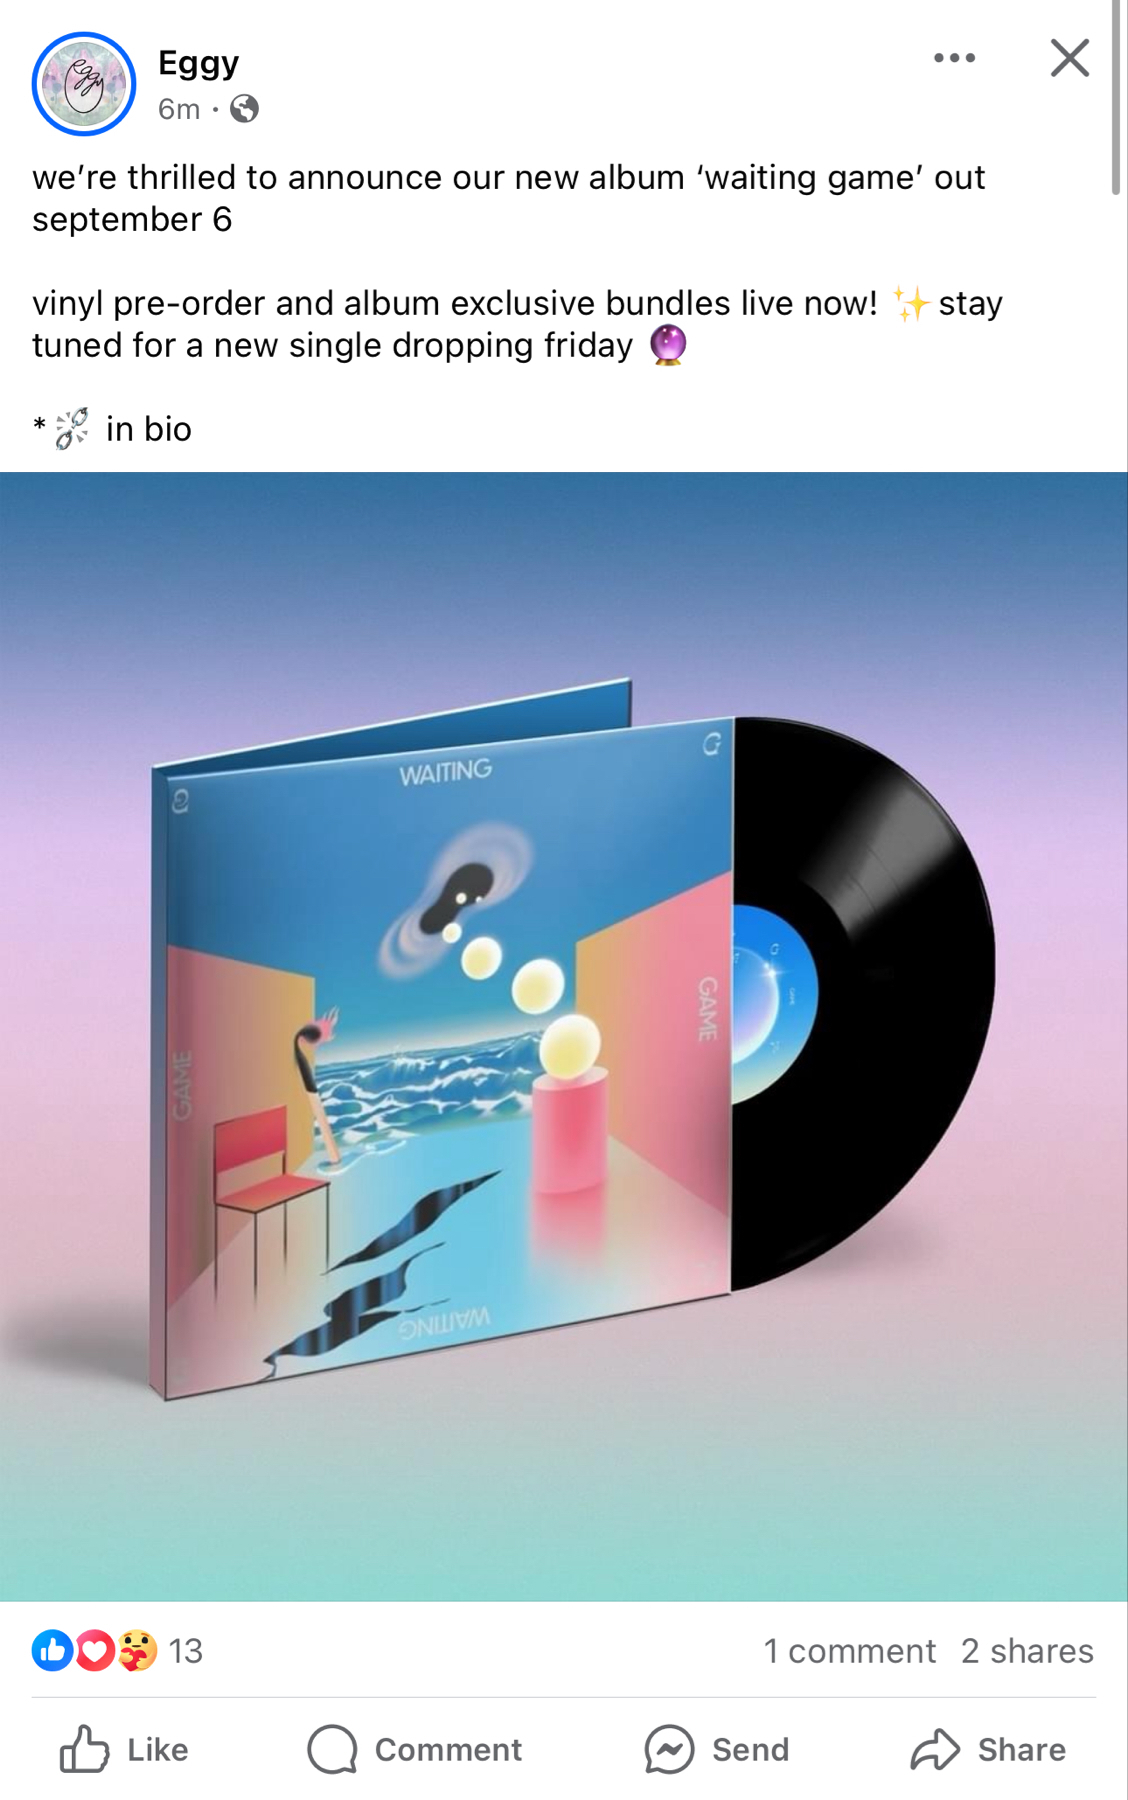 A social media post by a user named Eggy announces their new album “Waiting Game,” set to release on September 6. The post includes details about vinyl pre-orders and album bundles, and previews a new single release on Friday. The attached image